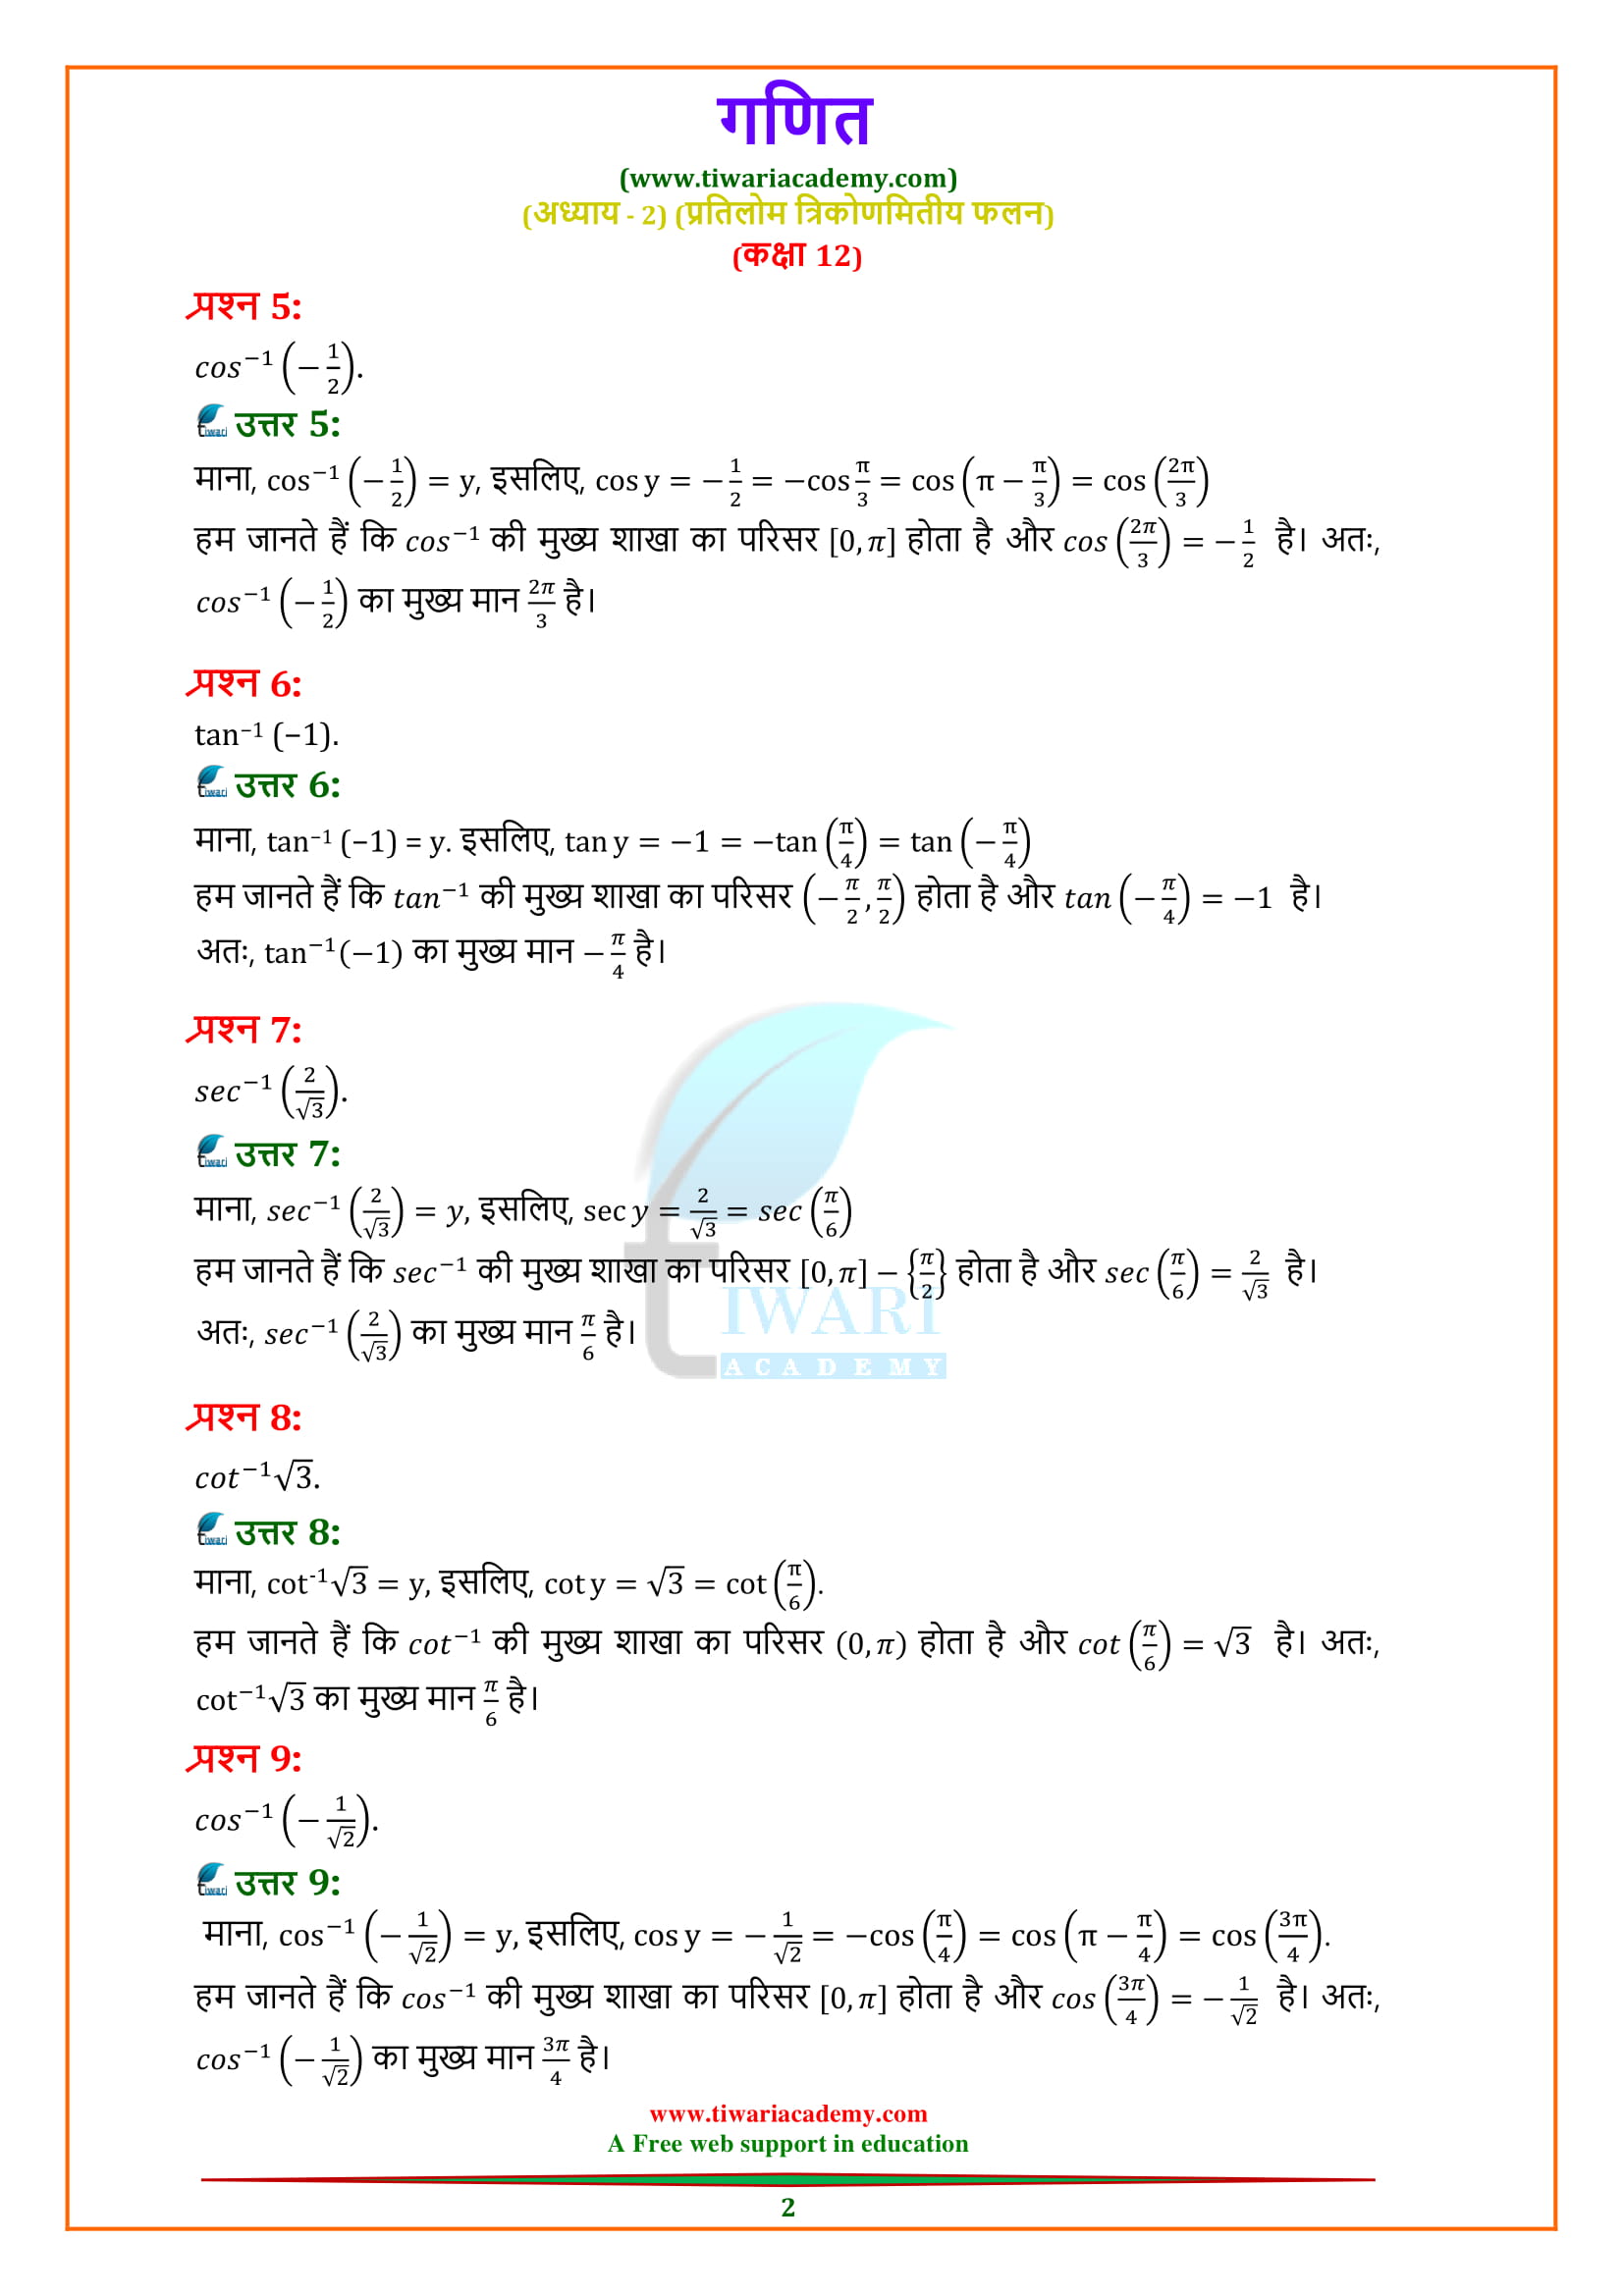 12 Maths Chapter 2 Exercise 2.1 Solutions Hindi me for UP & CBSE Board